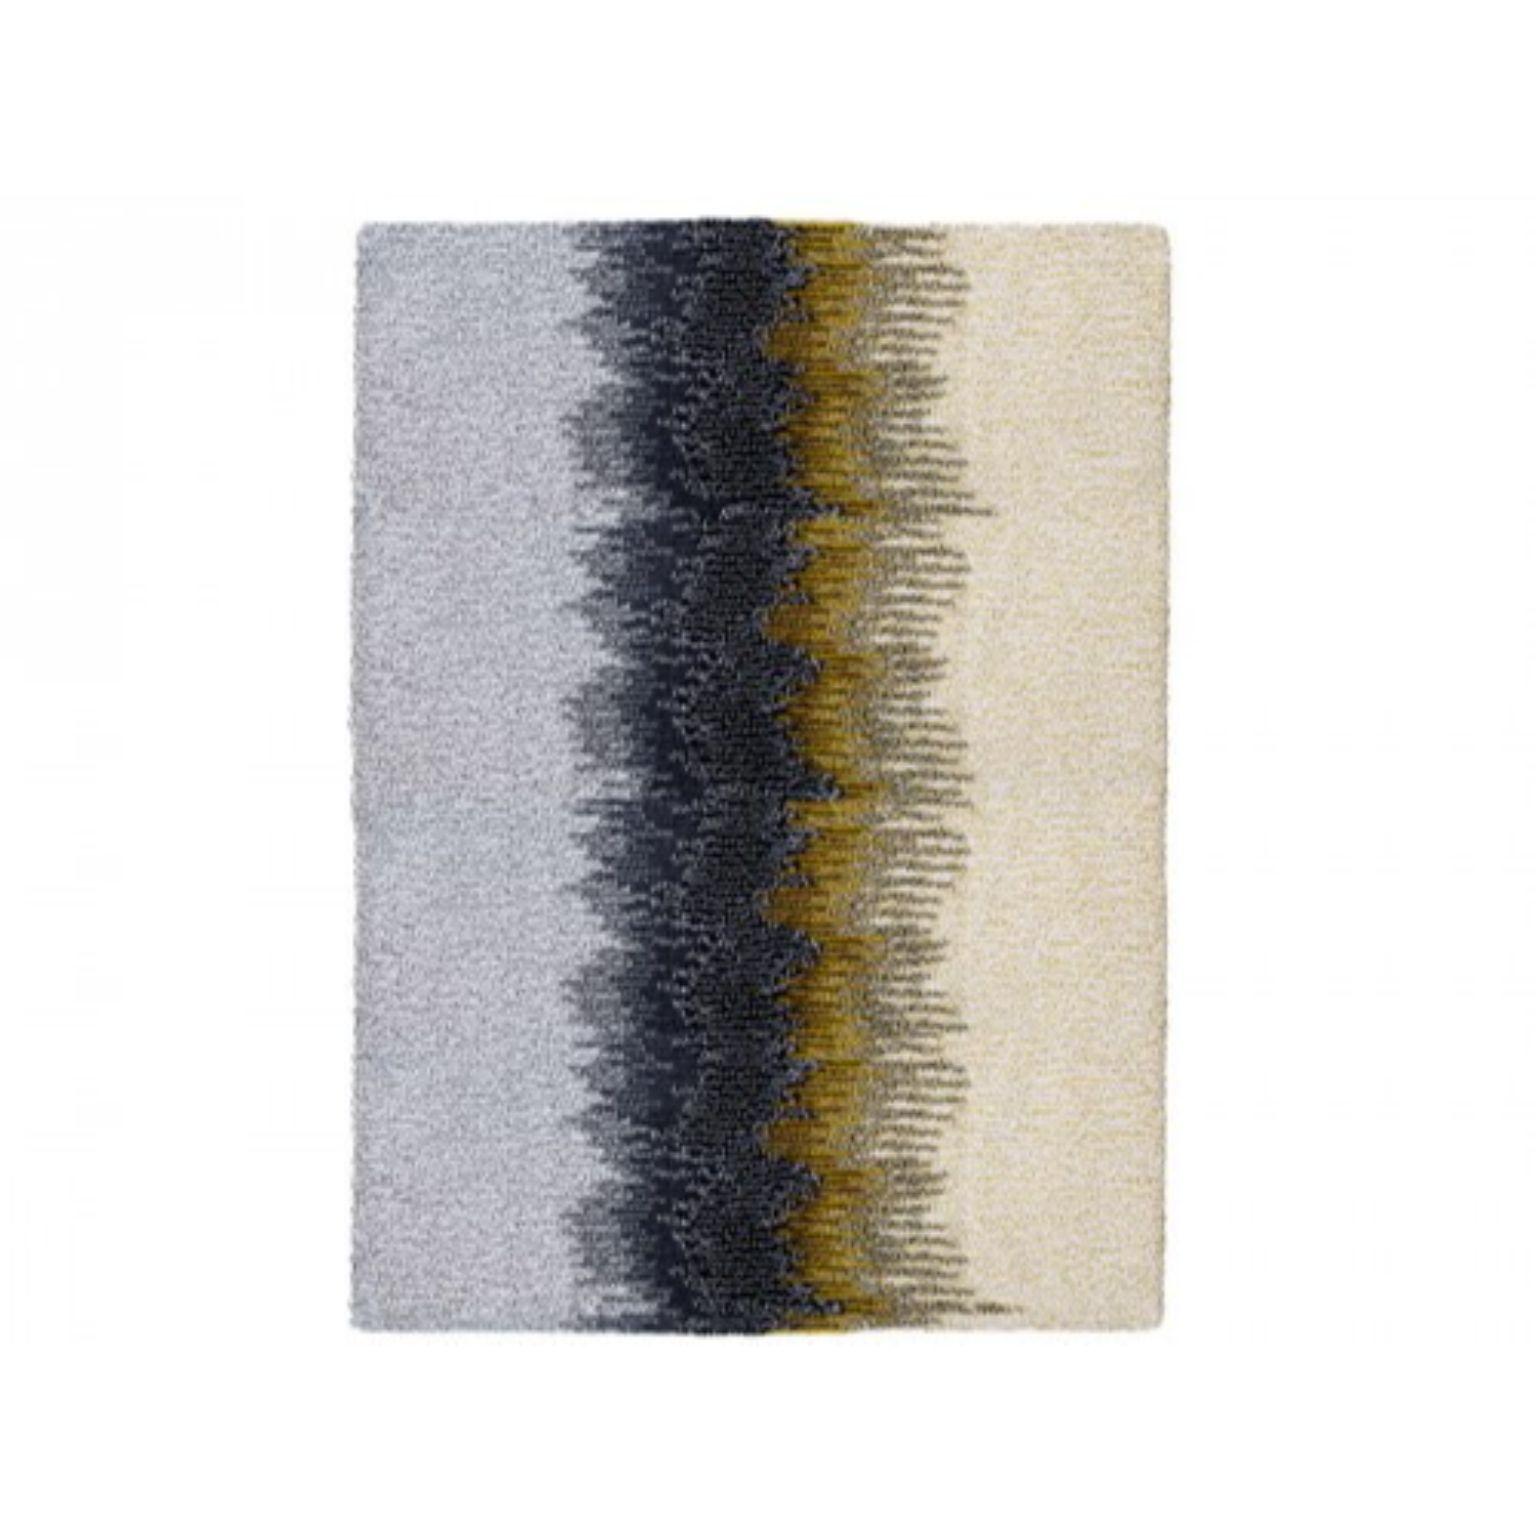 Lime Epoca Uno Rug by Alissa + Nienke 
Dimensions: W 200 x H 260 cm 
Materials: 100% New Zealand top-quality wool.
Available in sizes: Medium (150 x 200cm) and Extra Large (300 x 390cm). Also available in colors: Mustard/Brick or Lime/Gray.